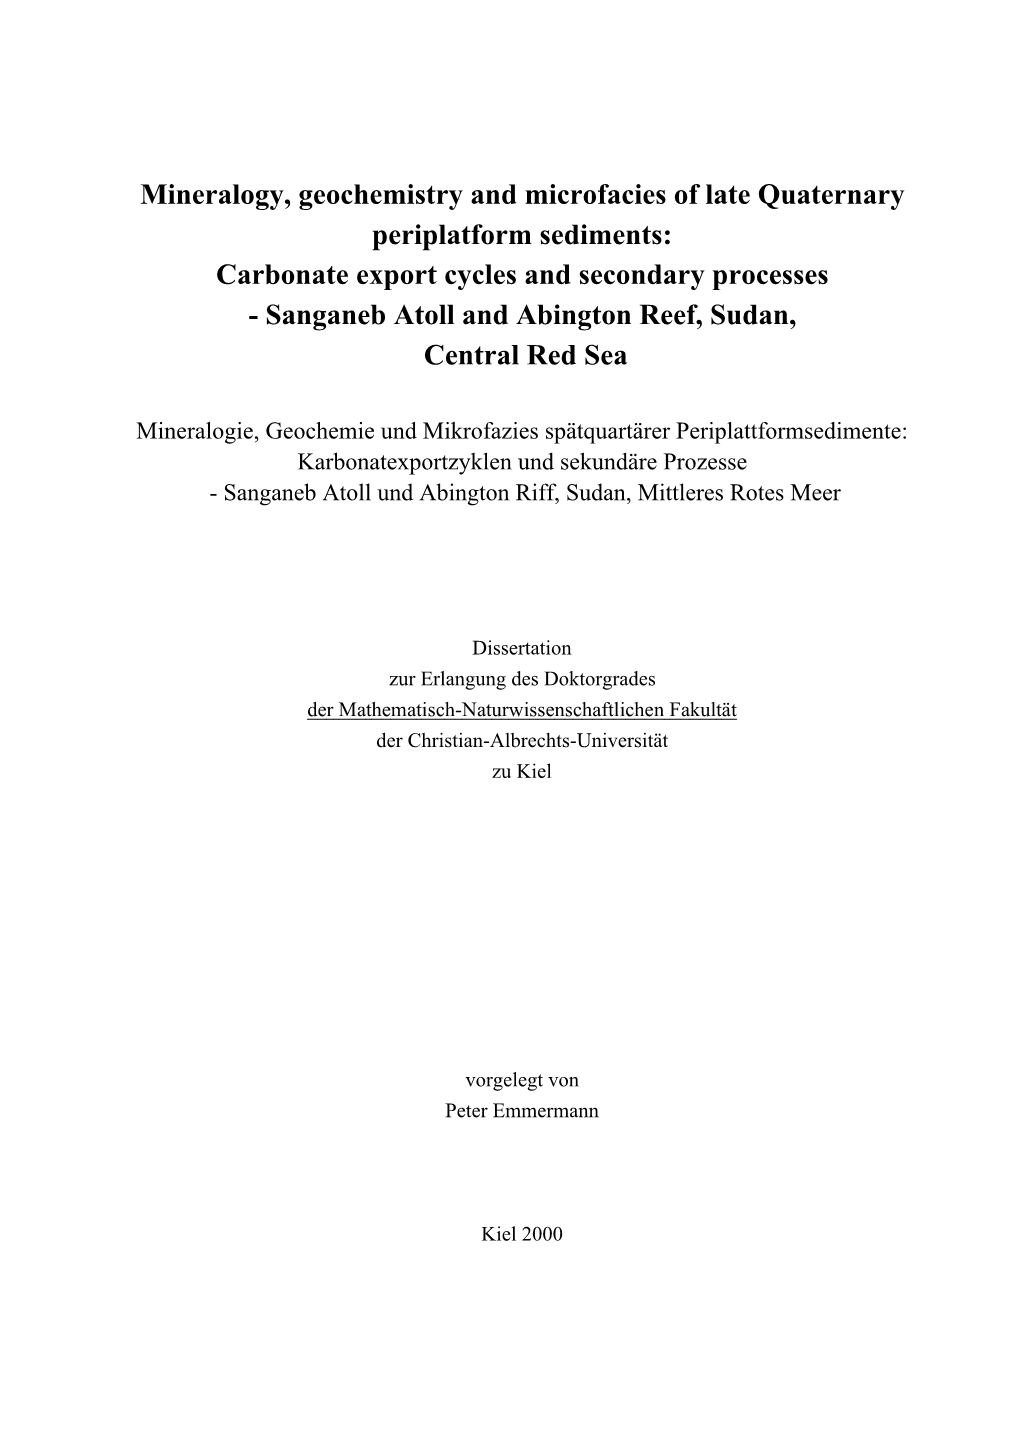 Carbonate Export Cycles and Secondary Processes - Sanganeb Atoll and Abington Reef, Sudan, Central Red Sea